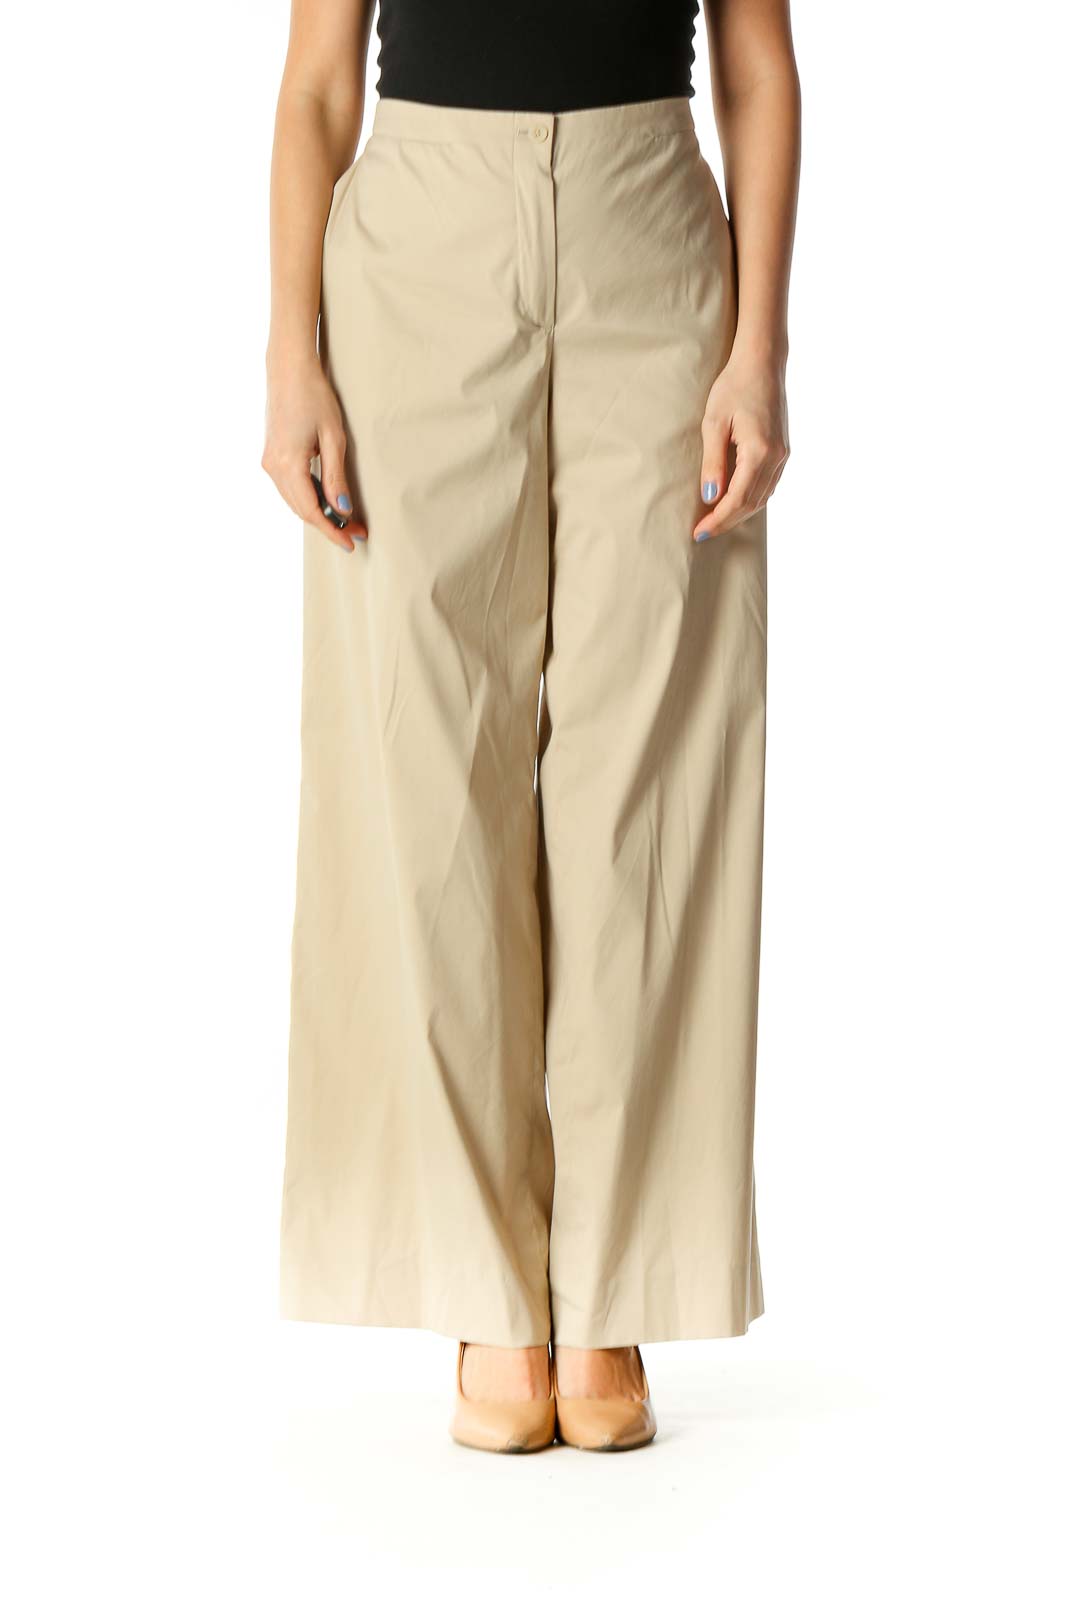 Beige Solid Casual Trousers Front